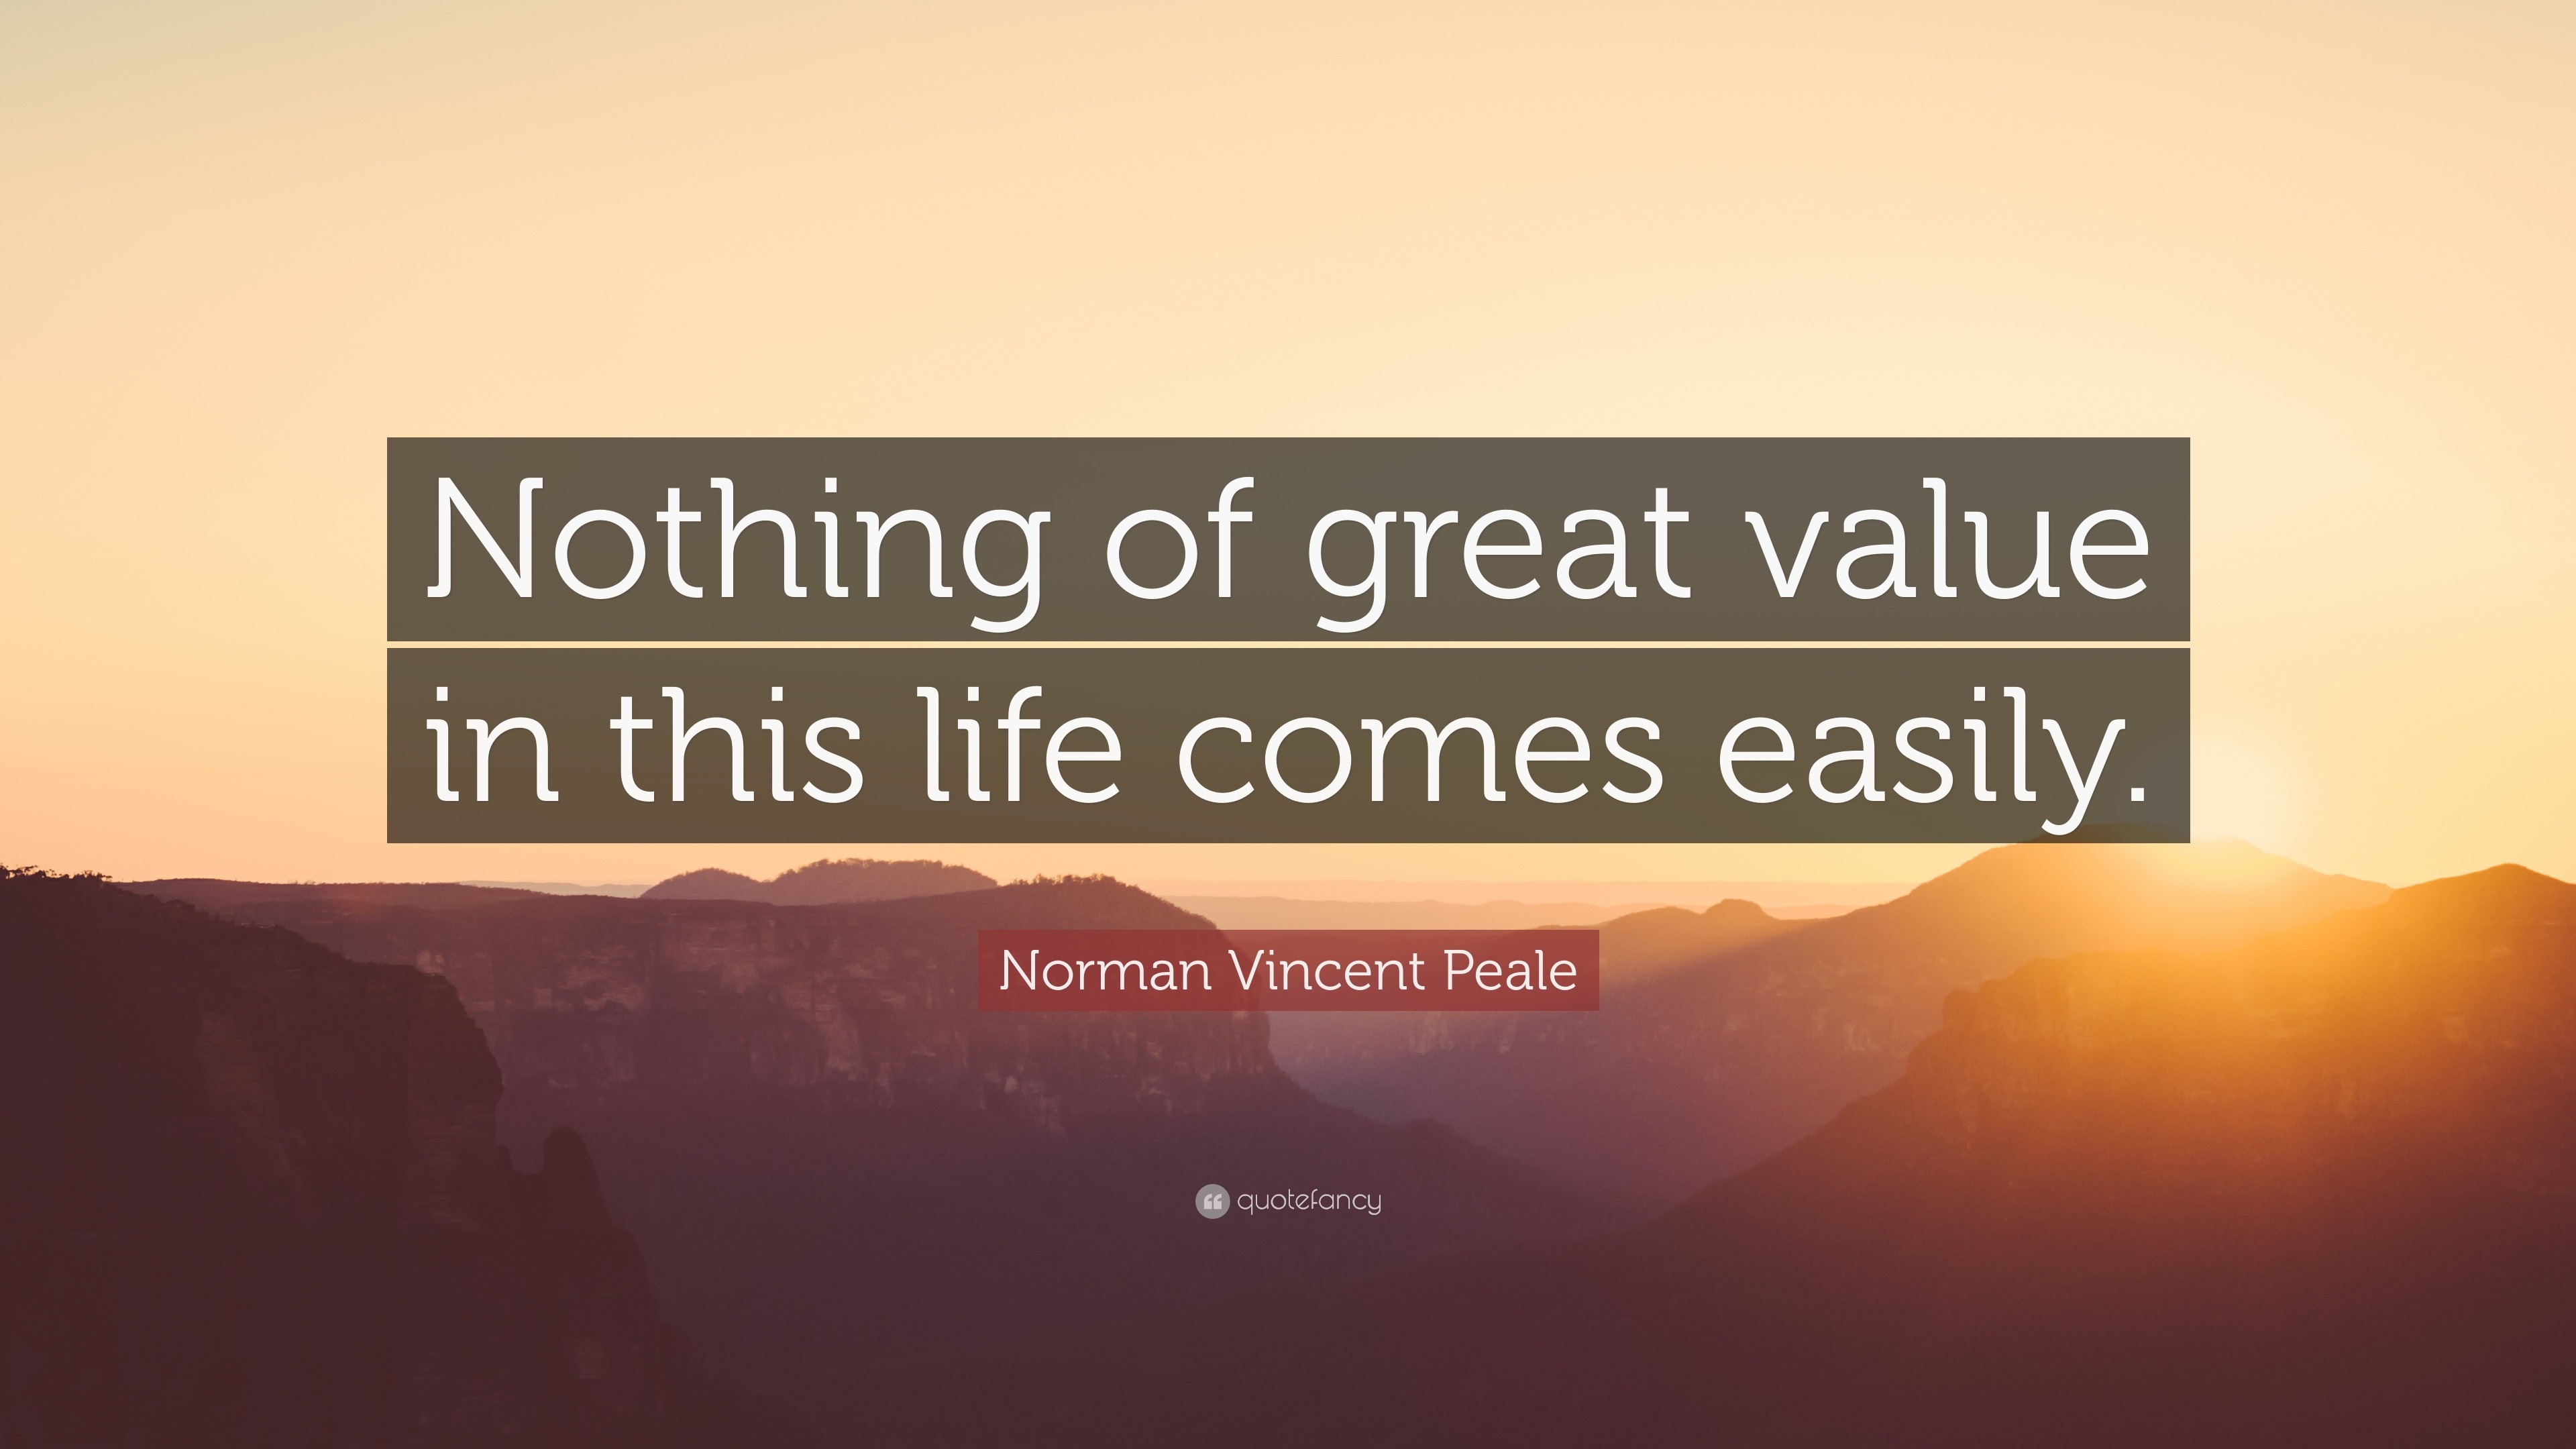 Norman Vincent Peale Quote: “Nothing of great value in this life comes